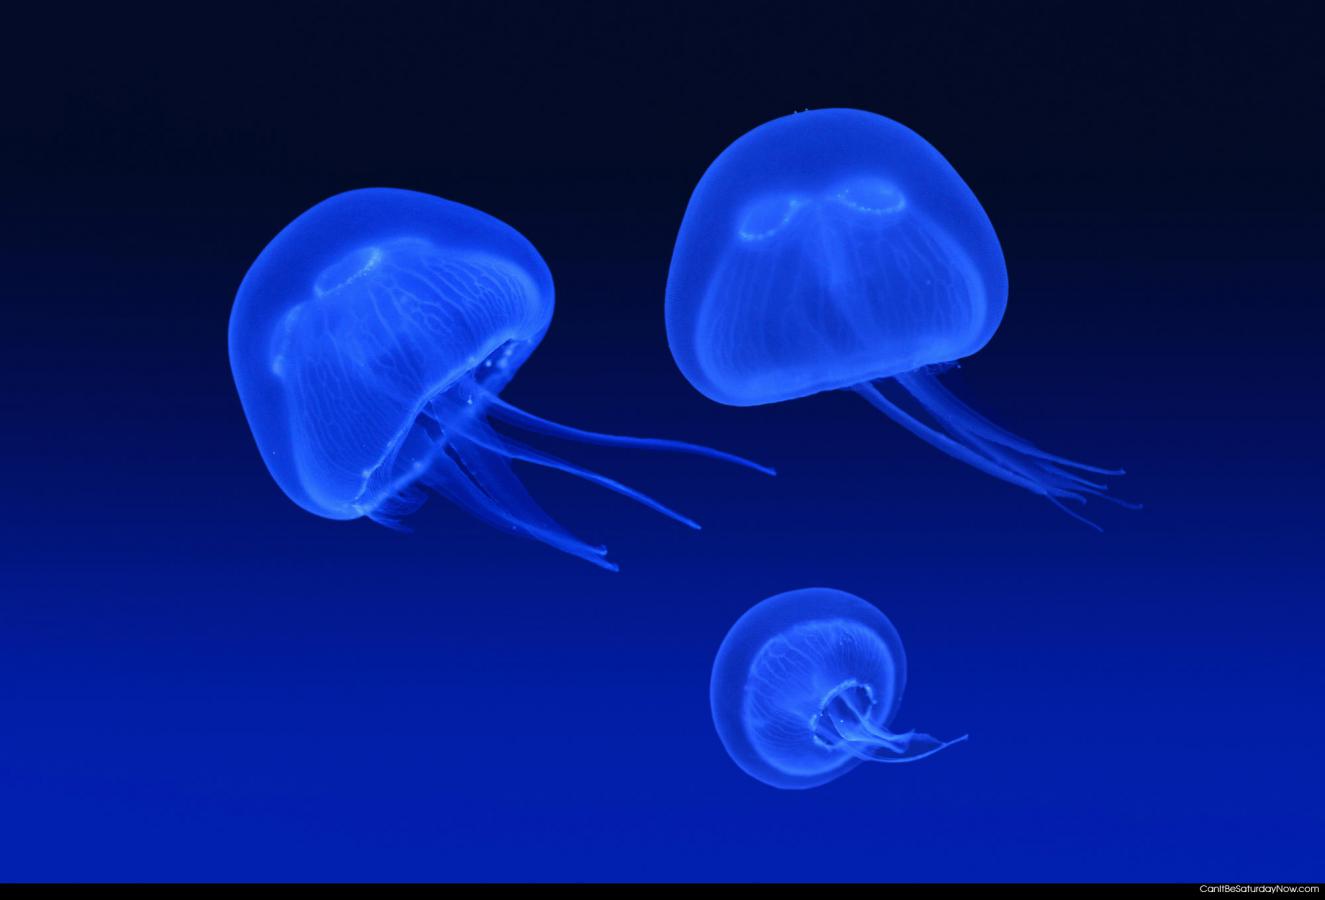 Blue jellyfish - always cool to look at